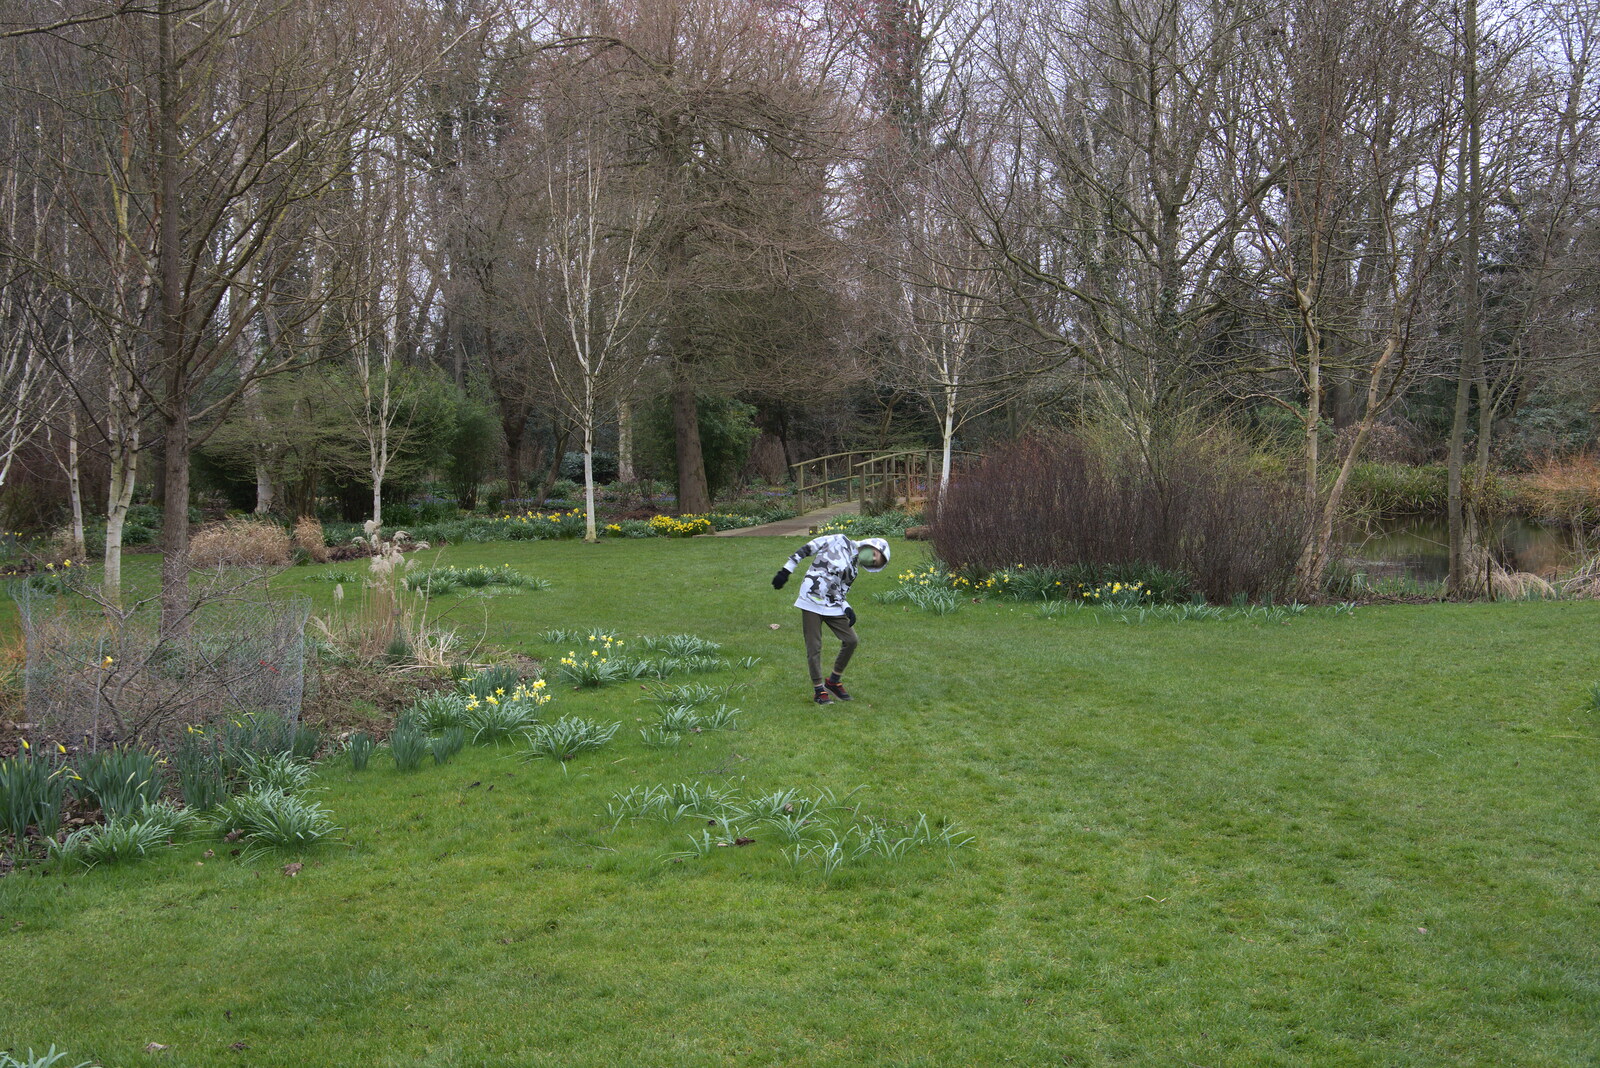 Harry does some sort of move from A Return to Bressingham Steam and Gardens, Bressingham, Norfolk - 28th March 2021